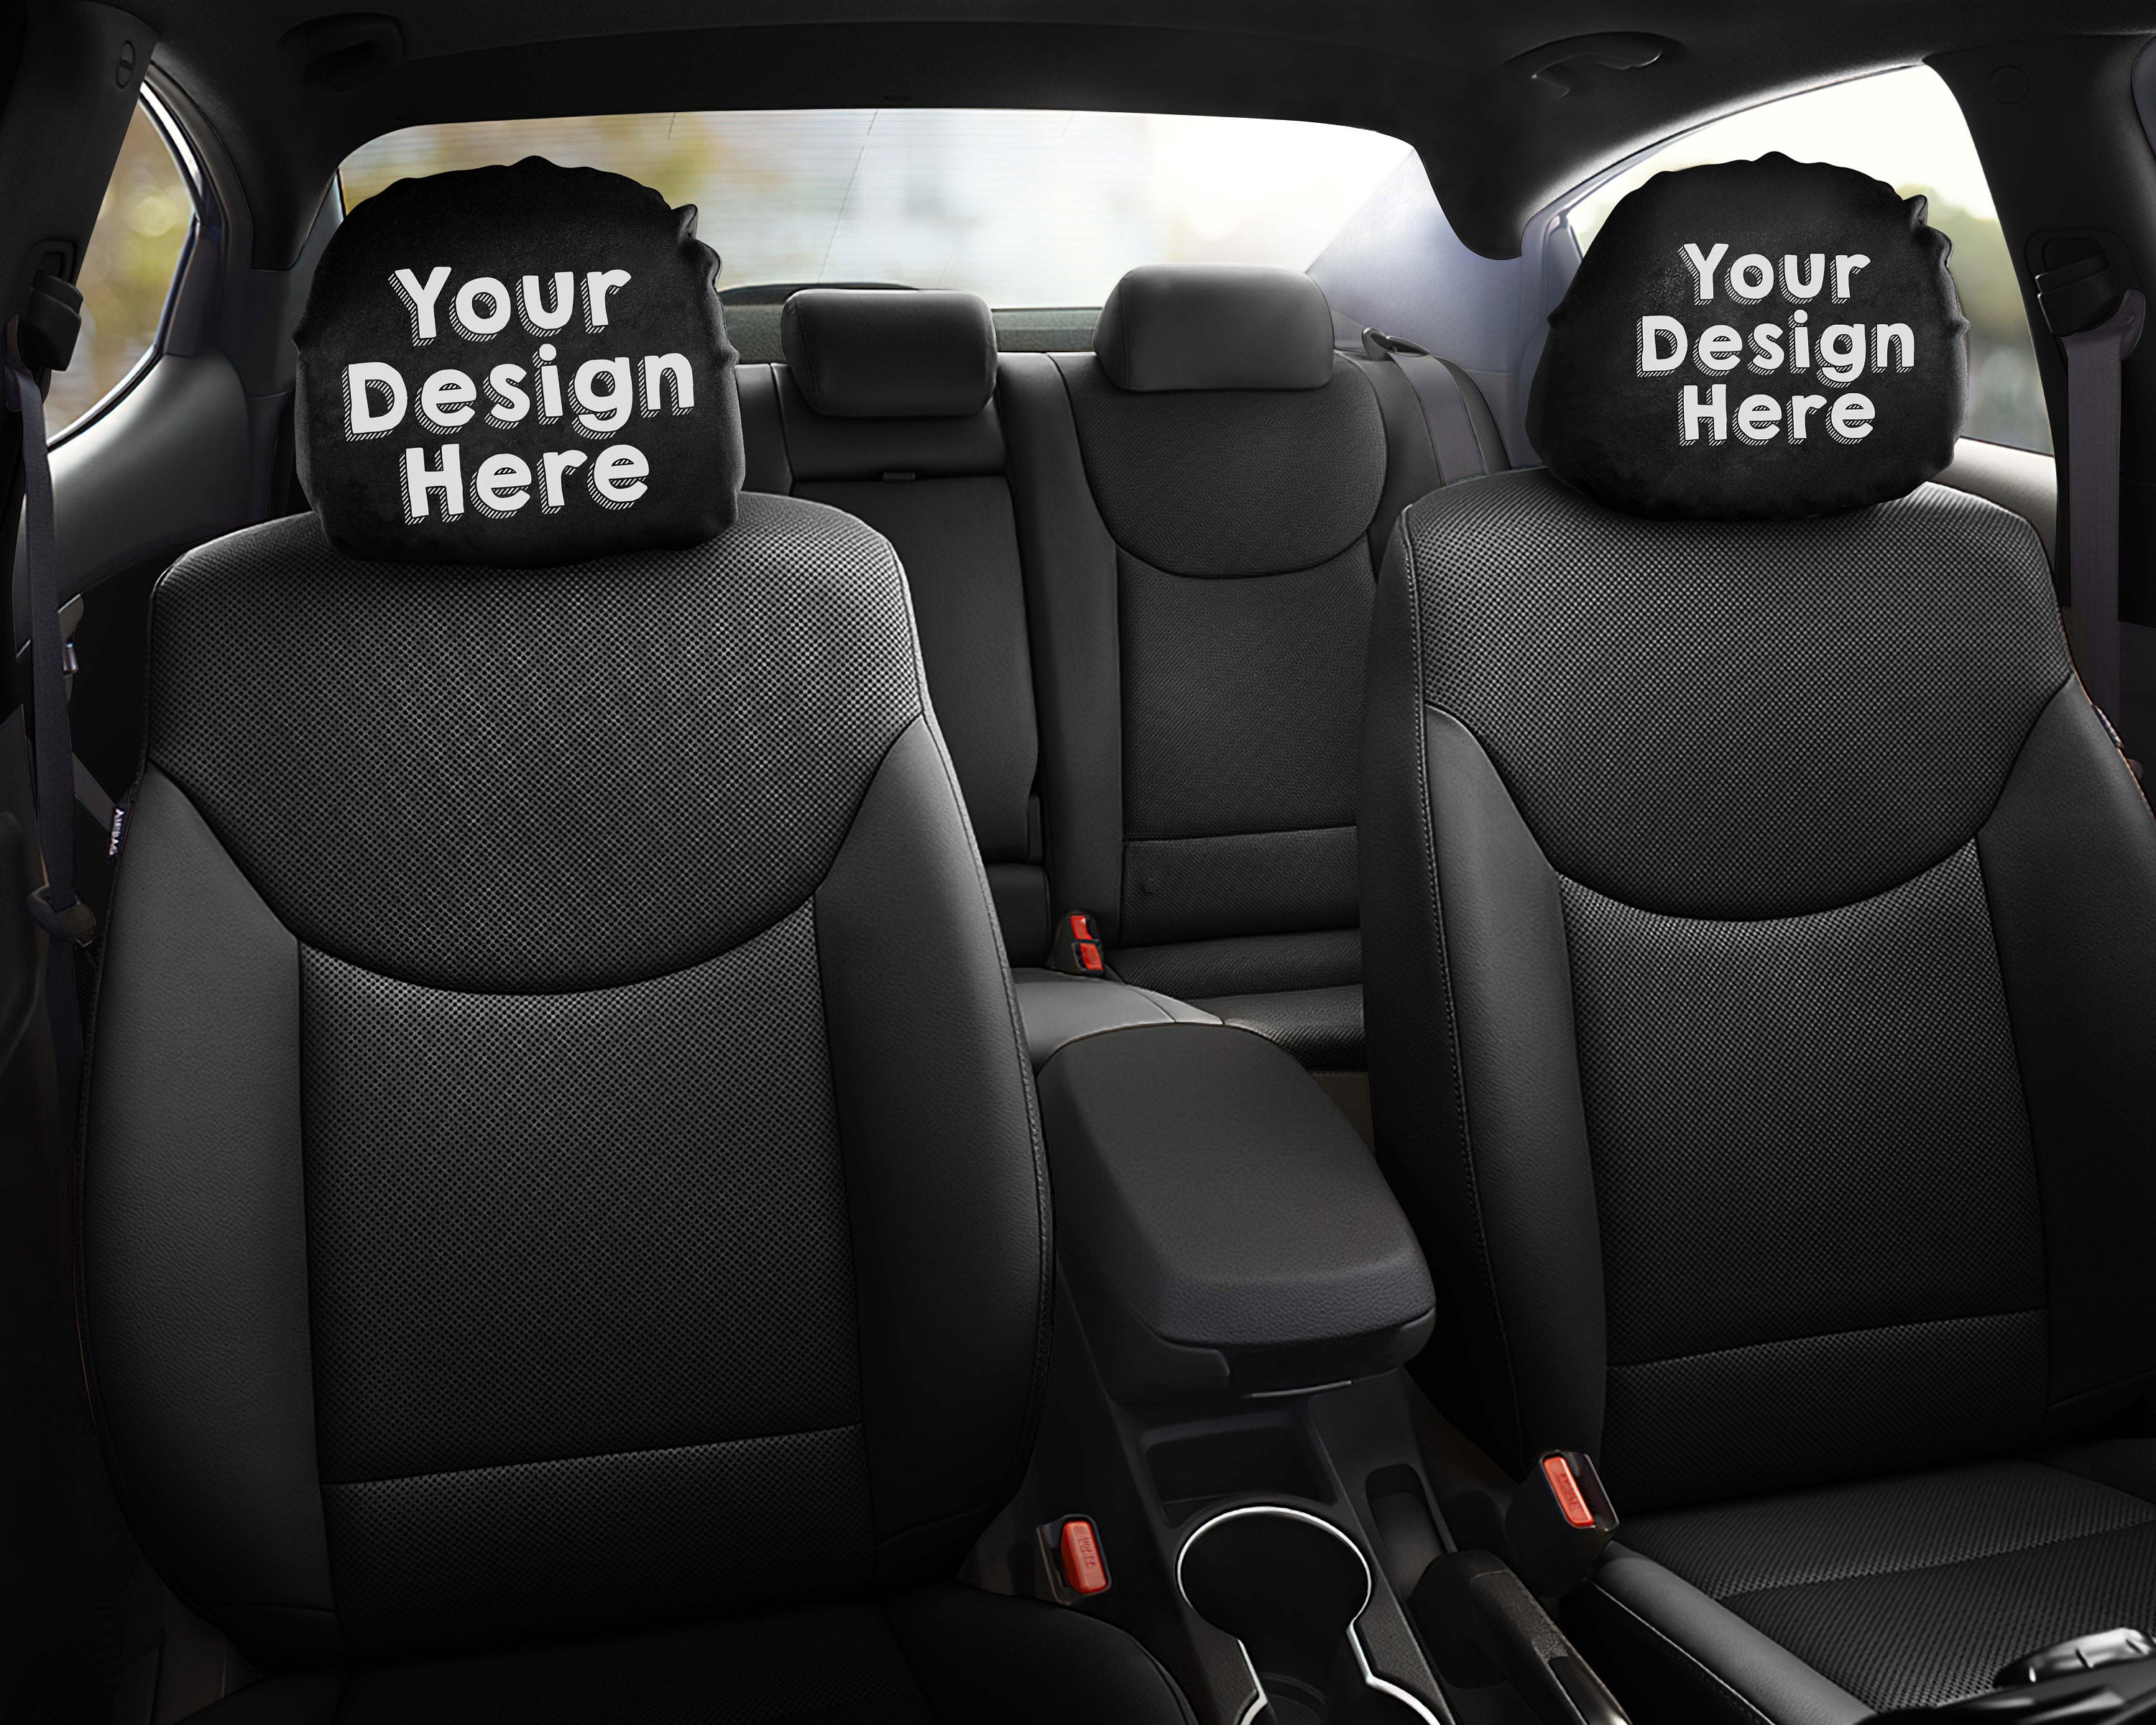 Custom Your Design Logo Text Car Decor Headrest Covers Set 2 Gift For  Husband Car Interior Accessories, Personalized Gift, sold by MrKas, SKU  24535309